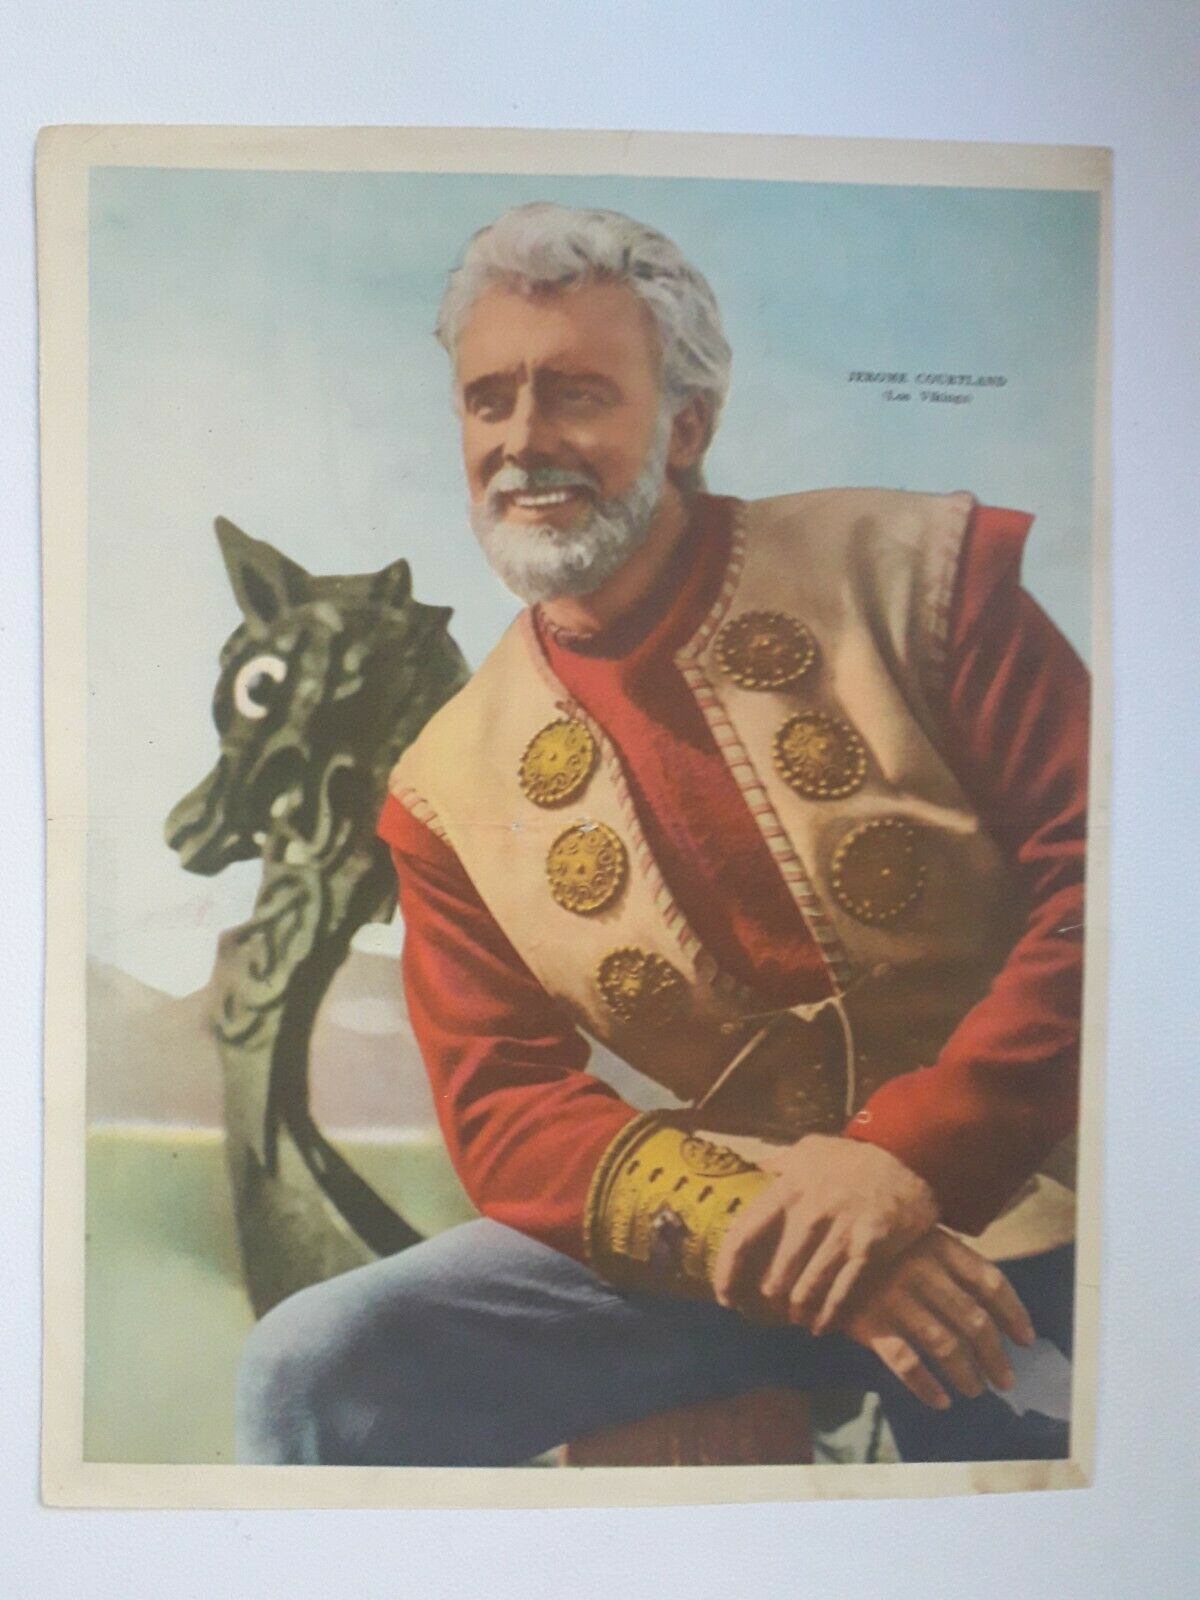 Jerome Courtland - "tales Of The Vikings" - Orig. Poster Tv - Argentina 1960's